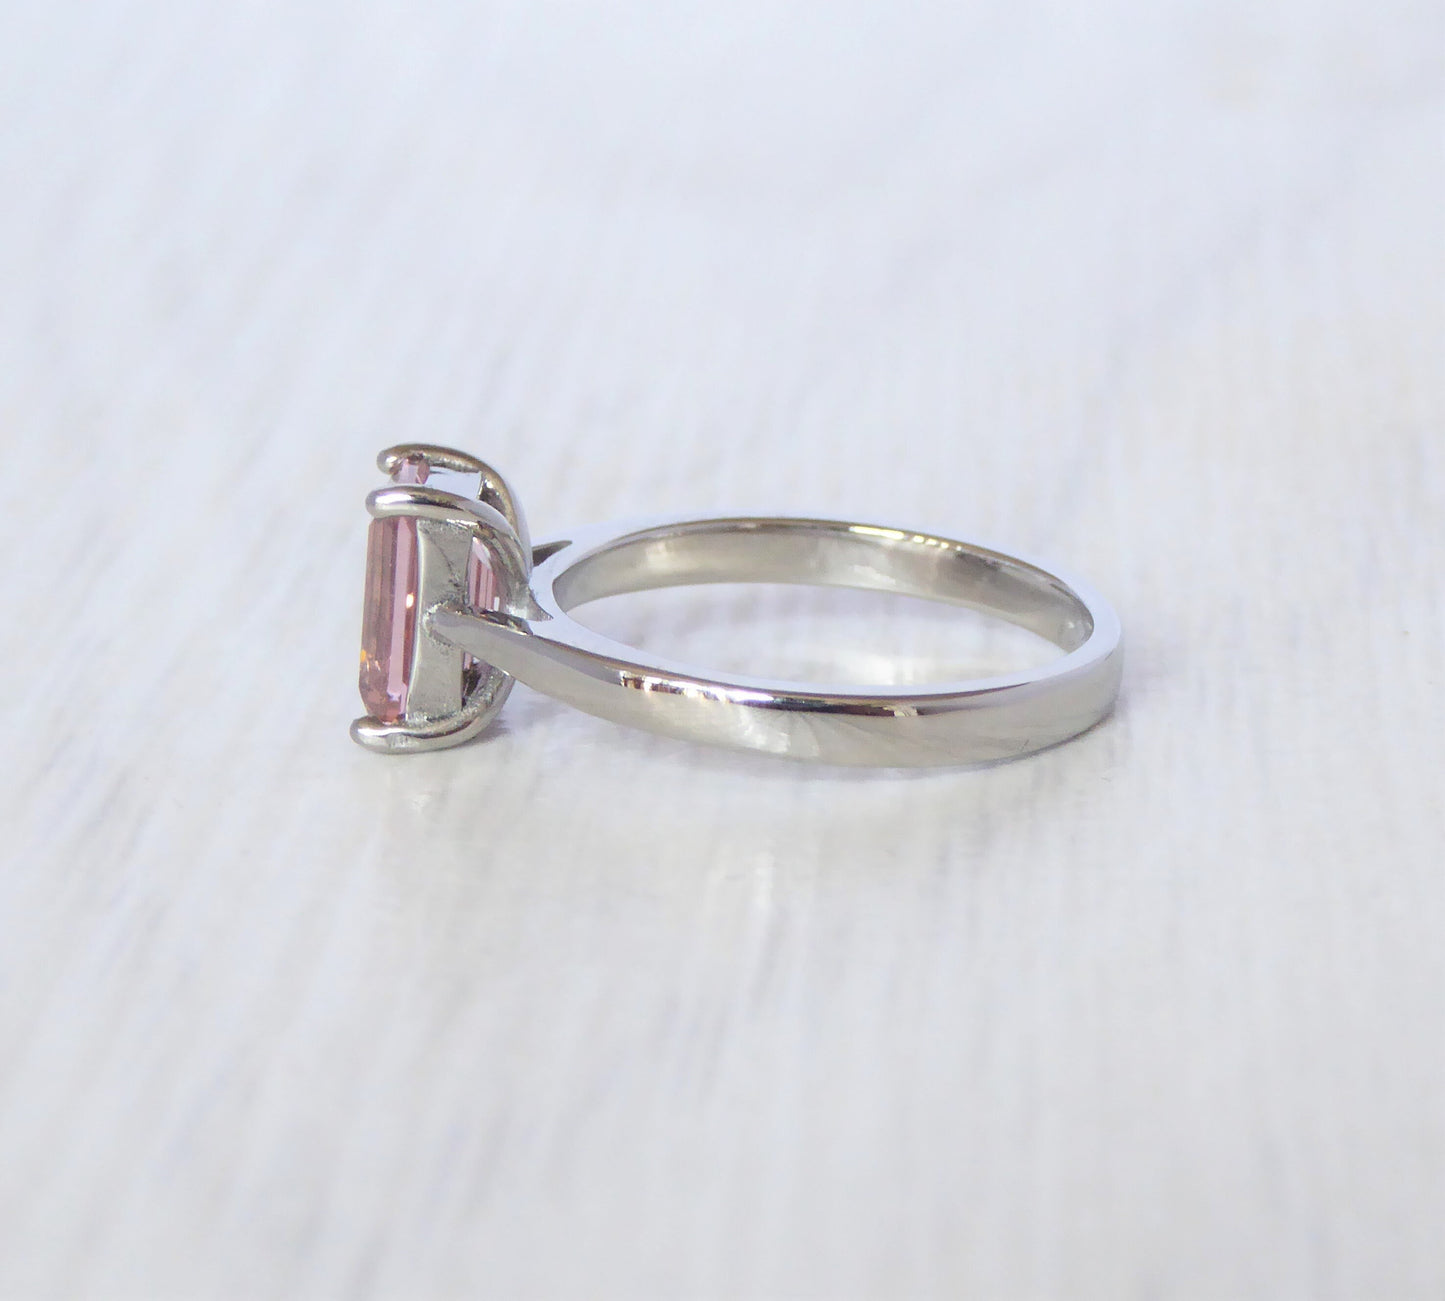 2ct Lab Morganite Emerald Cut Solitaire cathedral ring in Titanium or White Gold